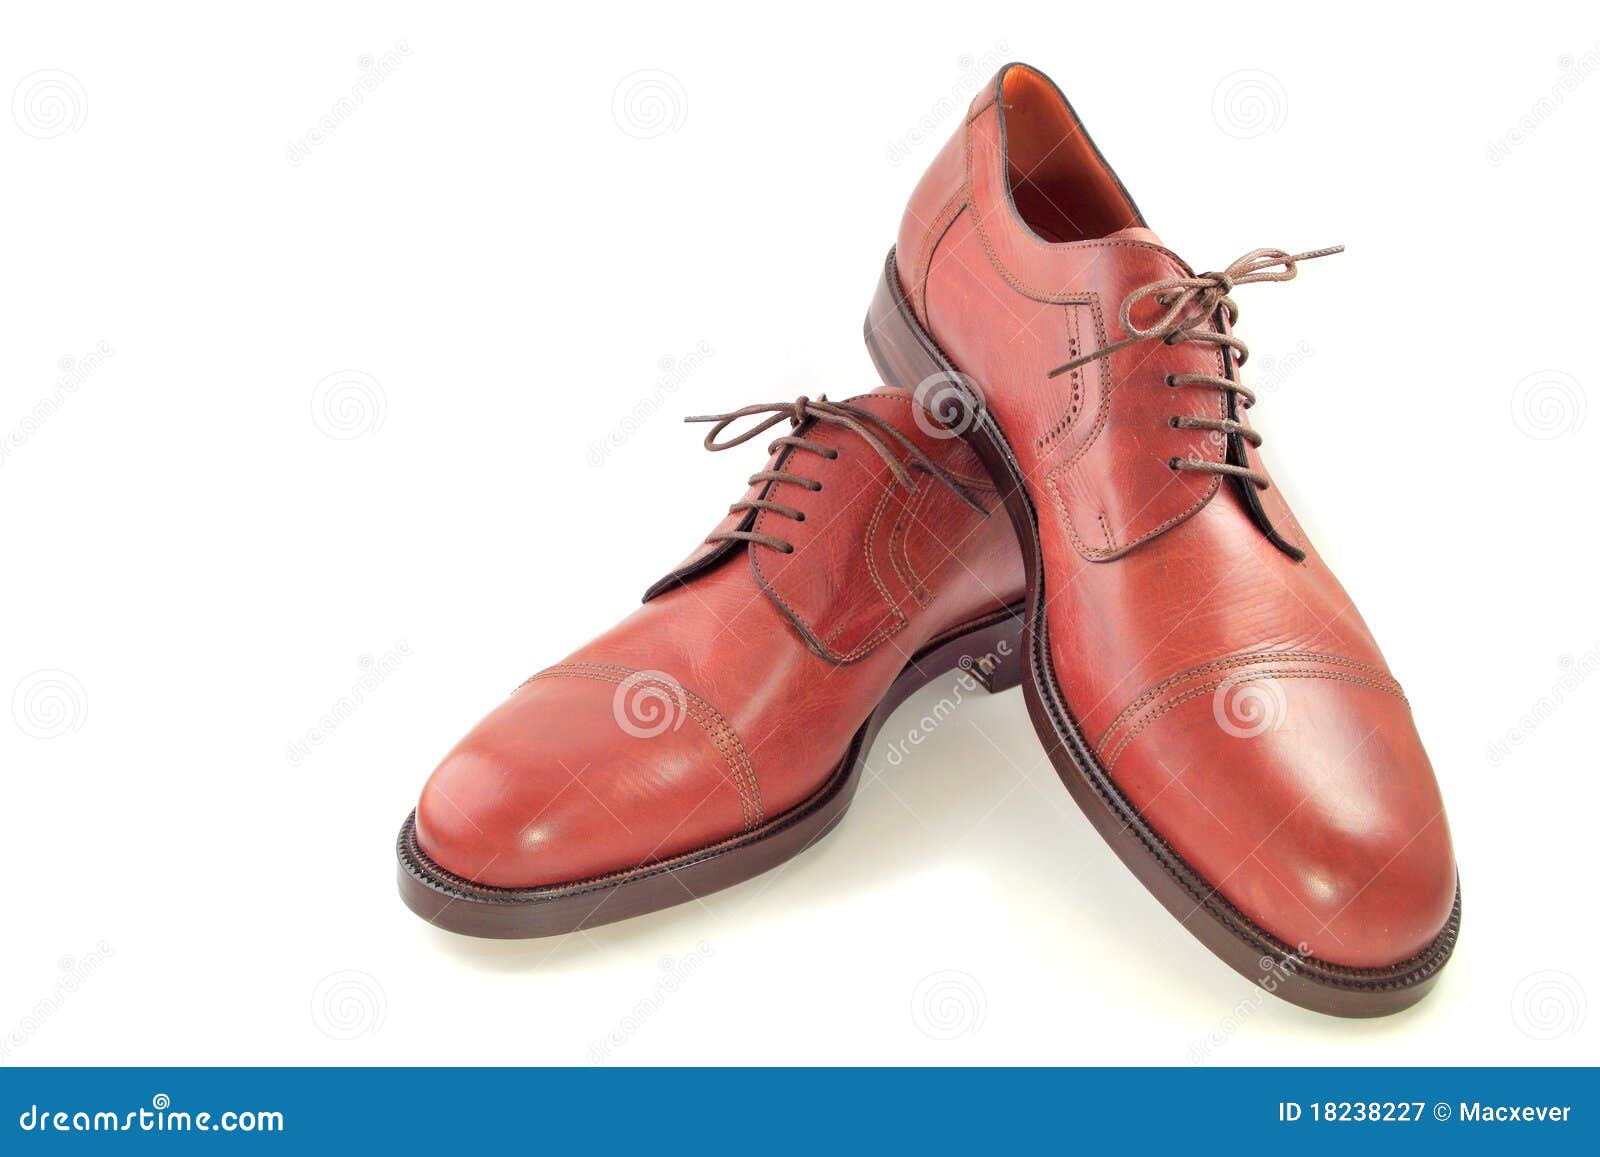 Isolated Shoes stock image. Image of comfortable, mocussins - 18238227